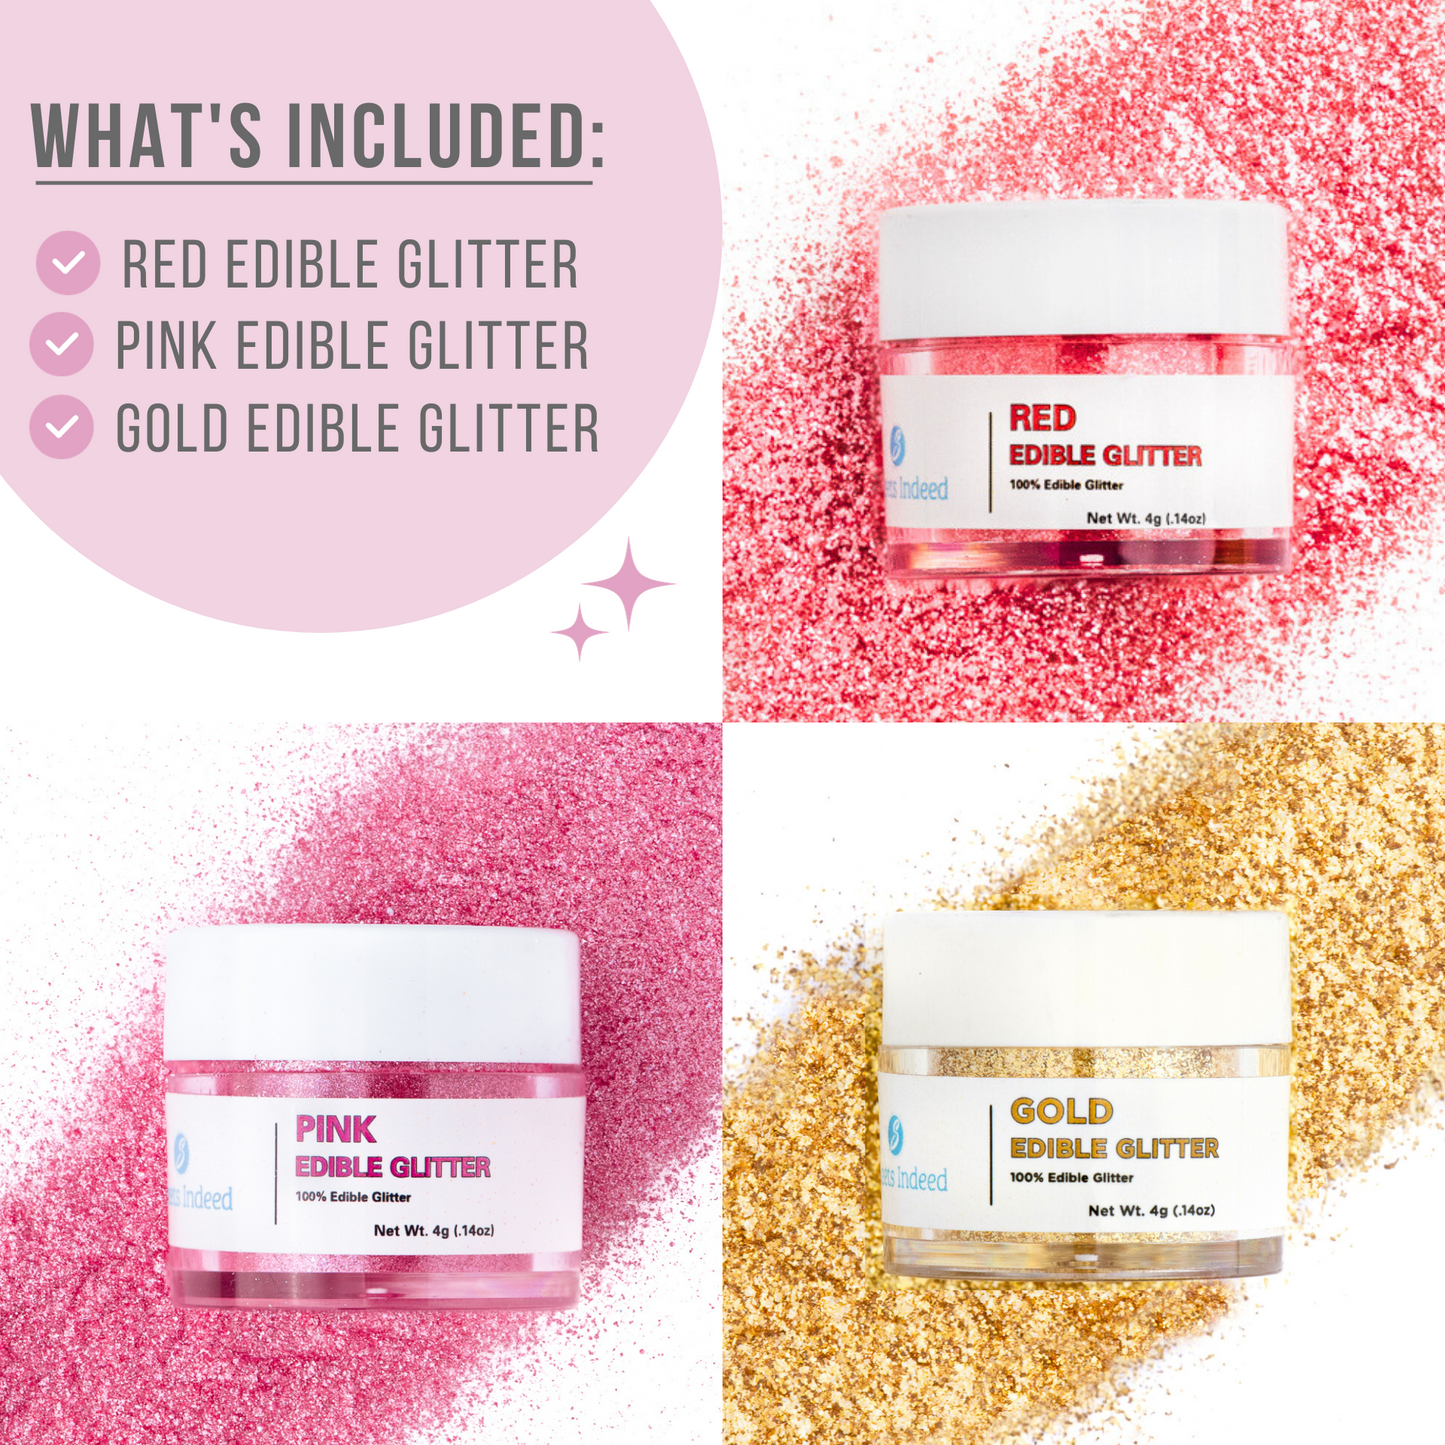 Edible Glitter 3 Pack - Pink, Red and Gold